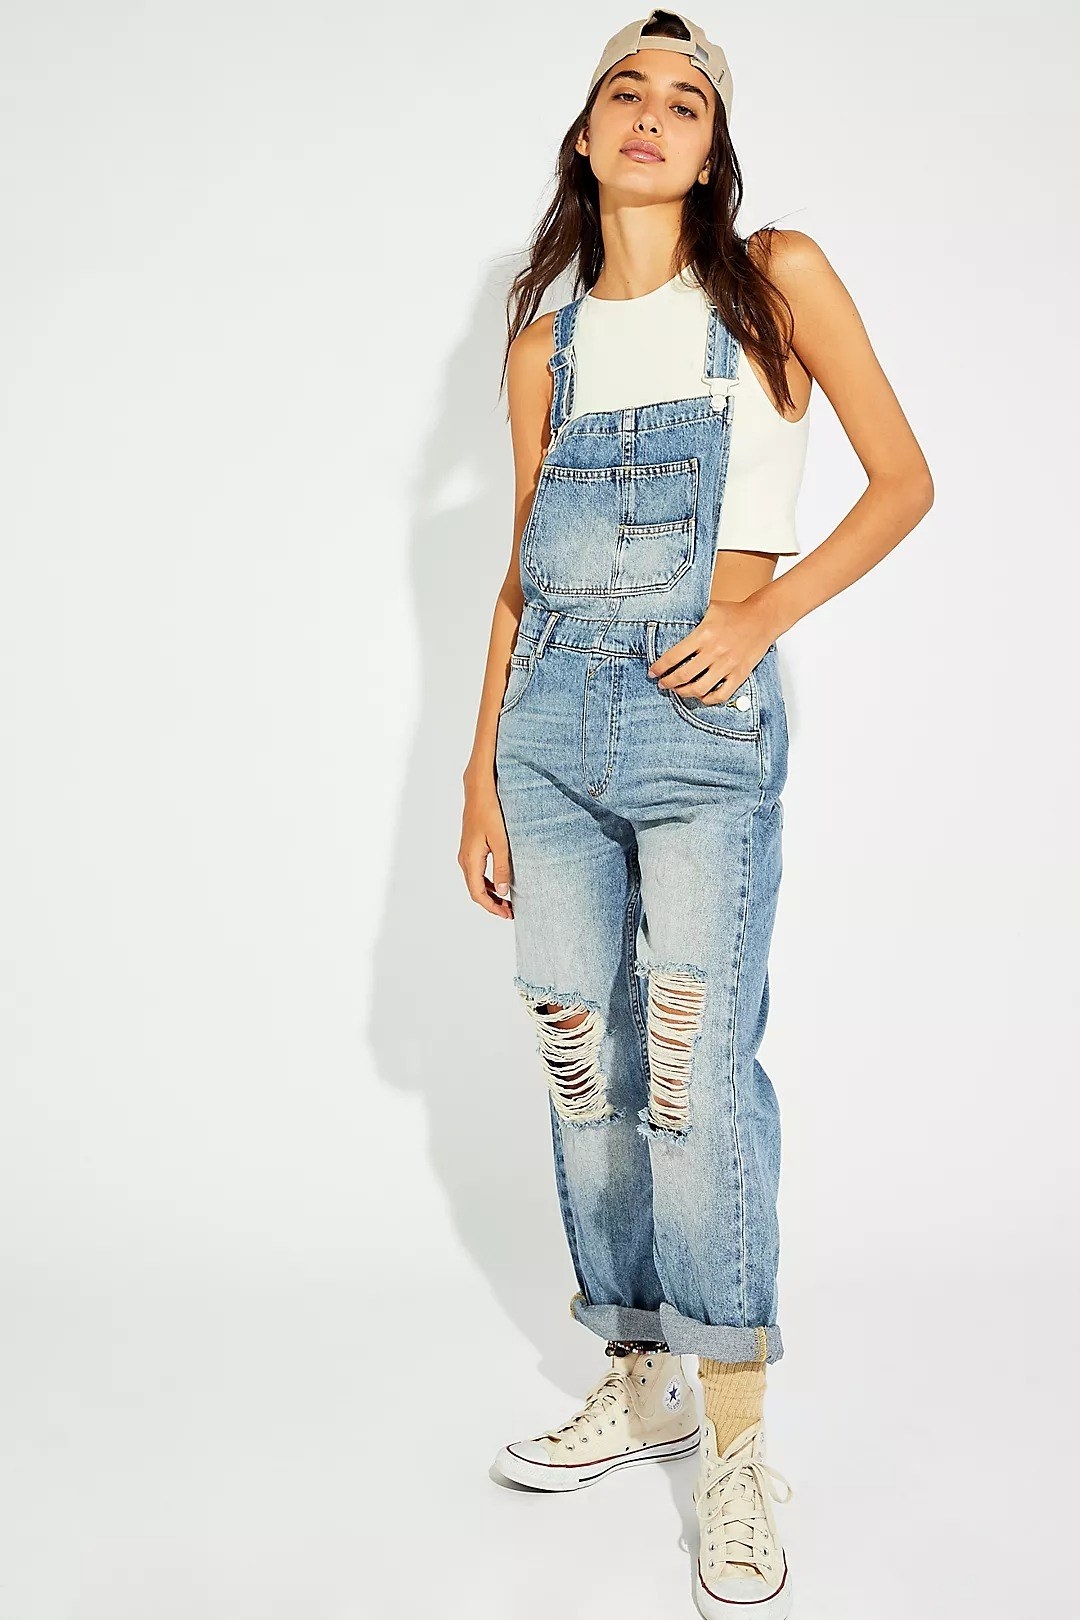 model wearing denim overalls with distressed holes in the middle of the knee are